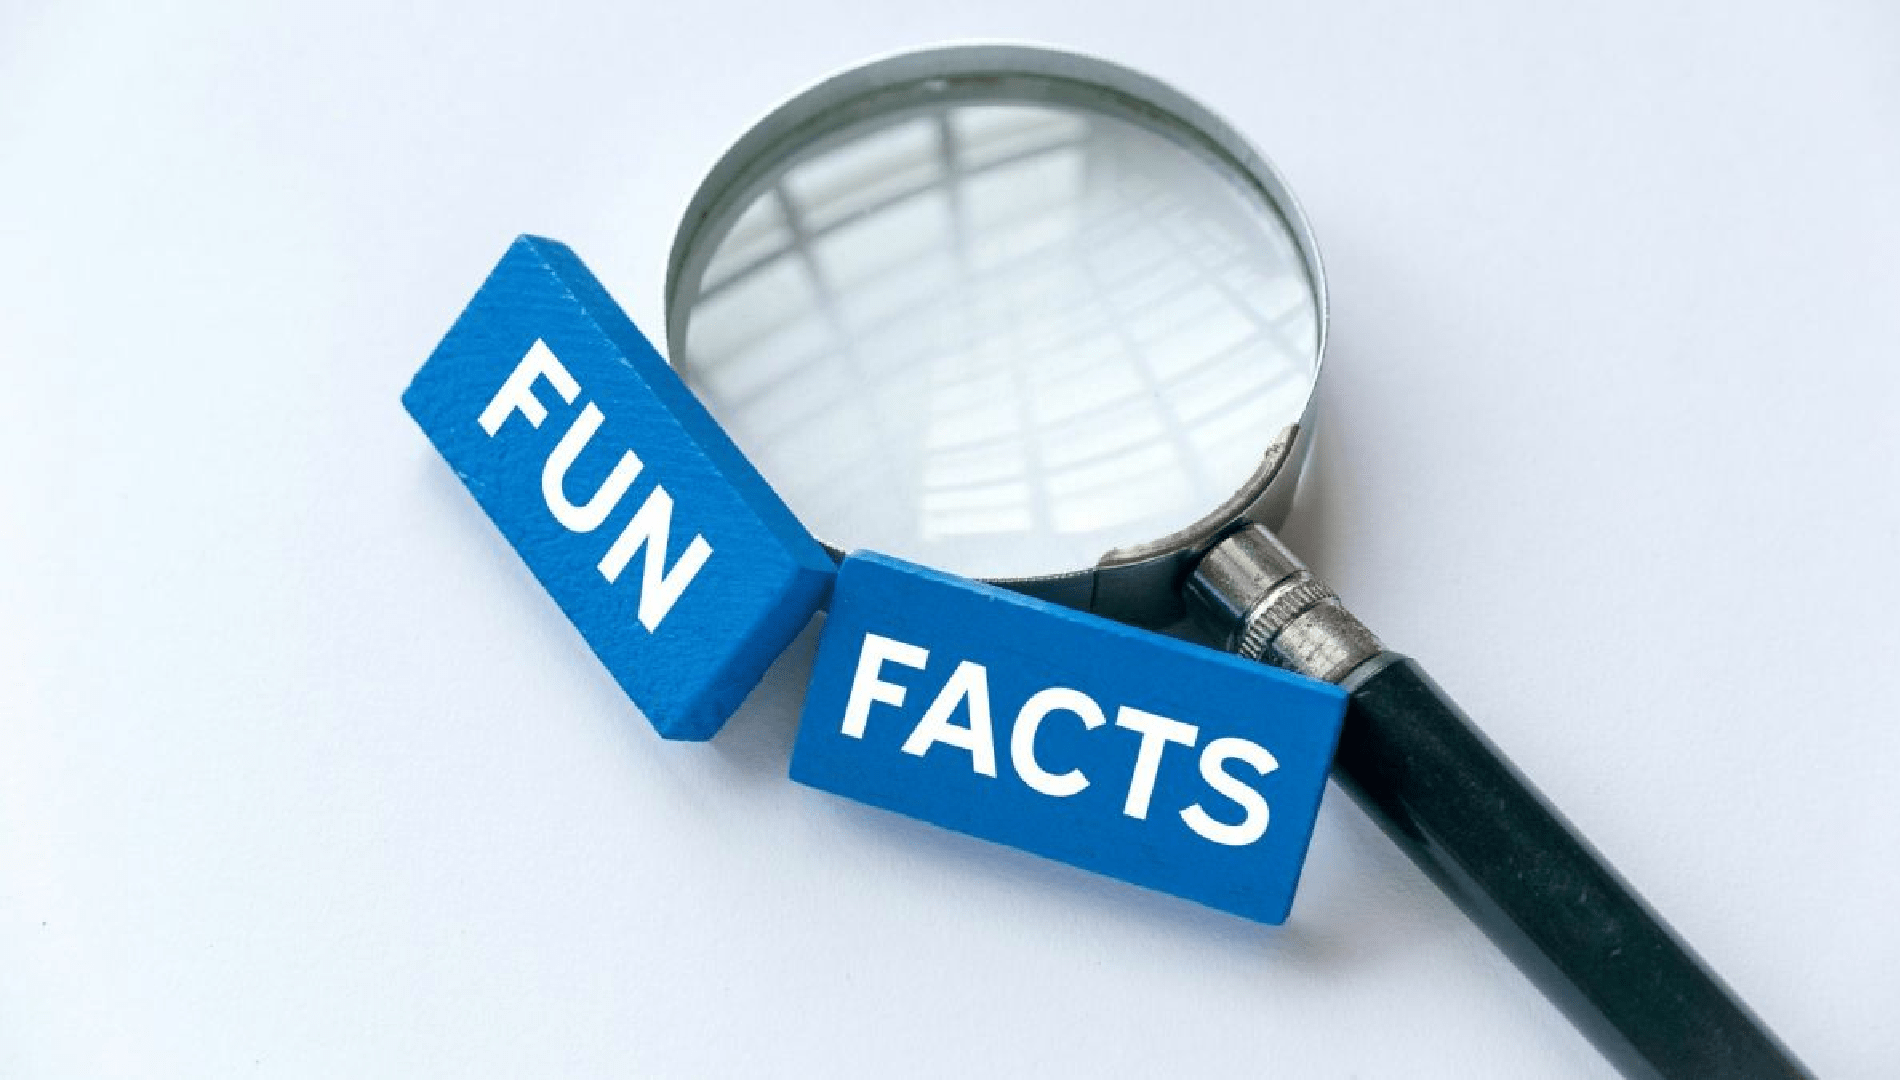 Fun Facts About Gambling and Online Casinos